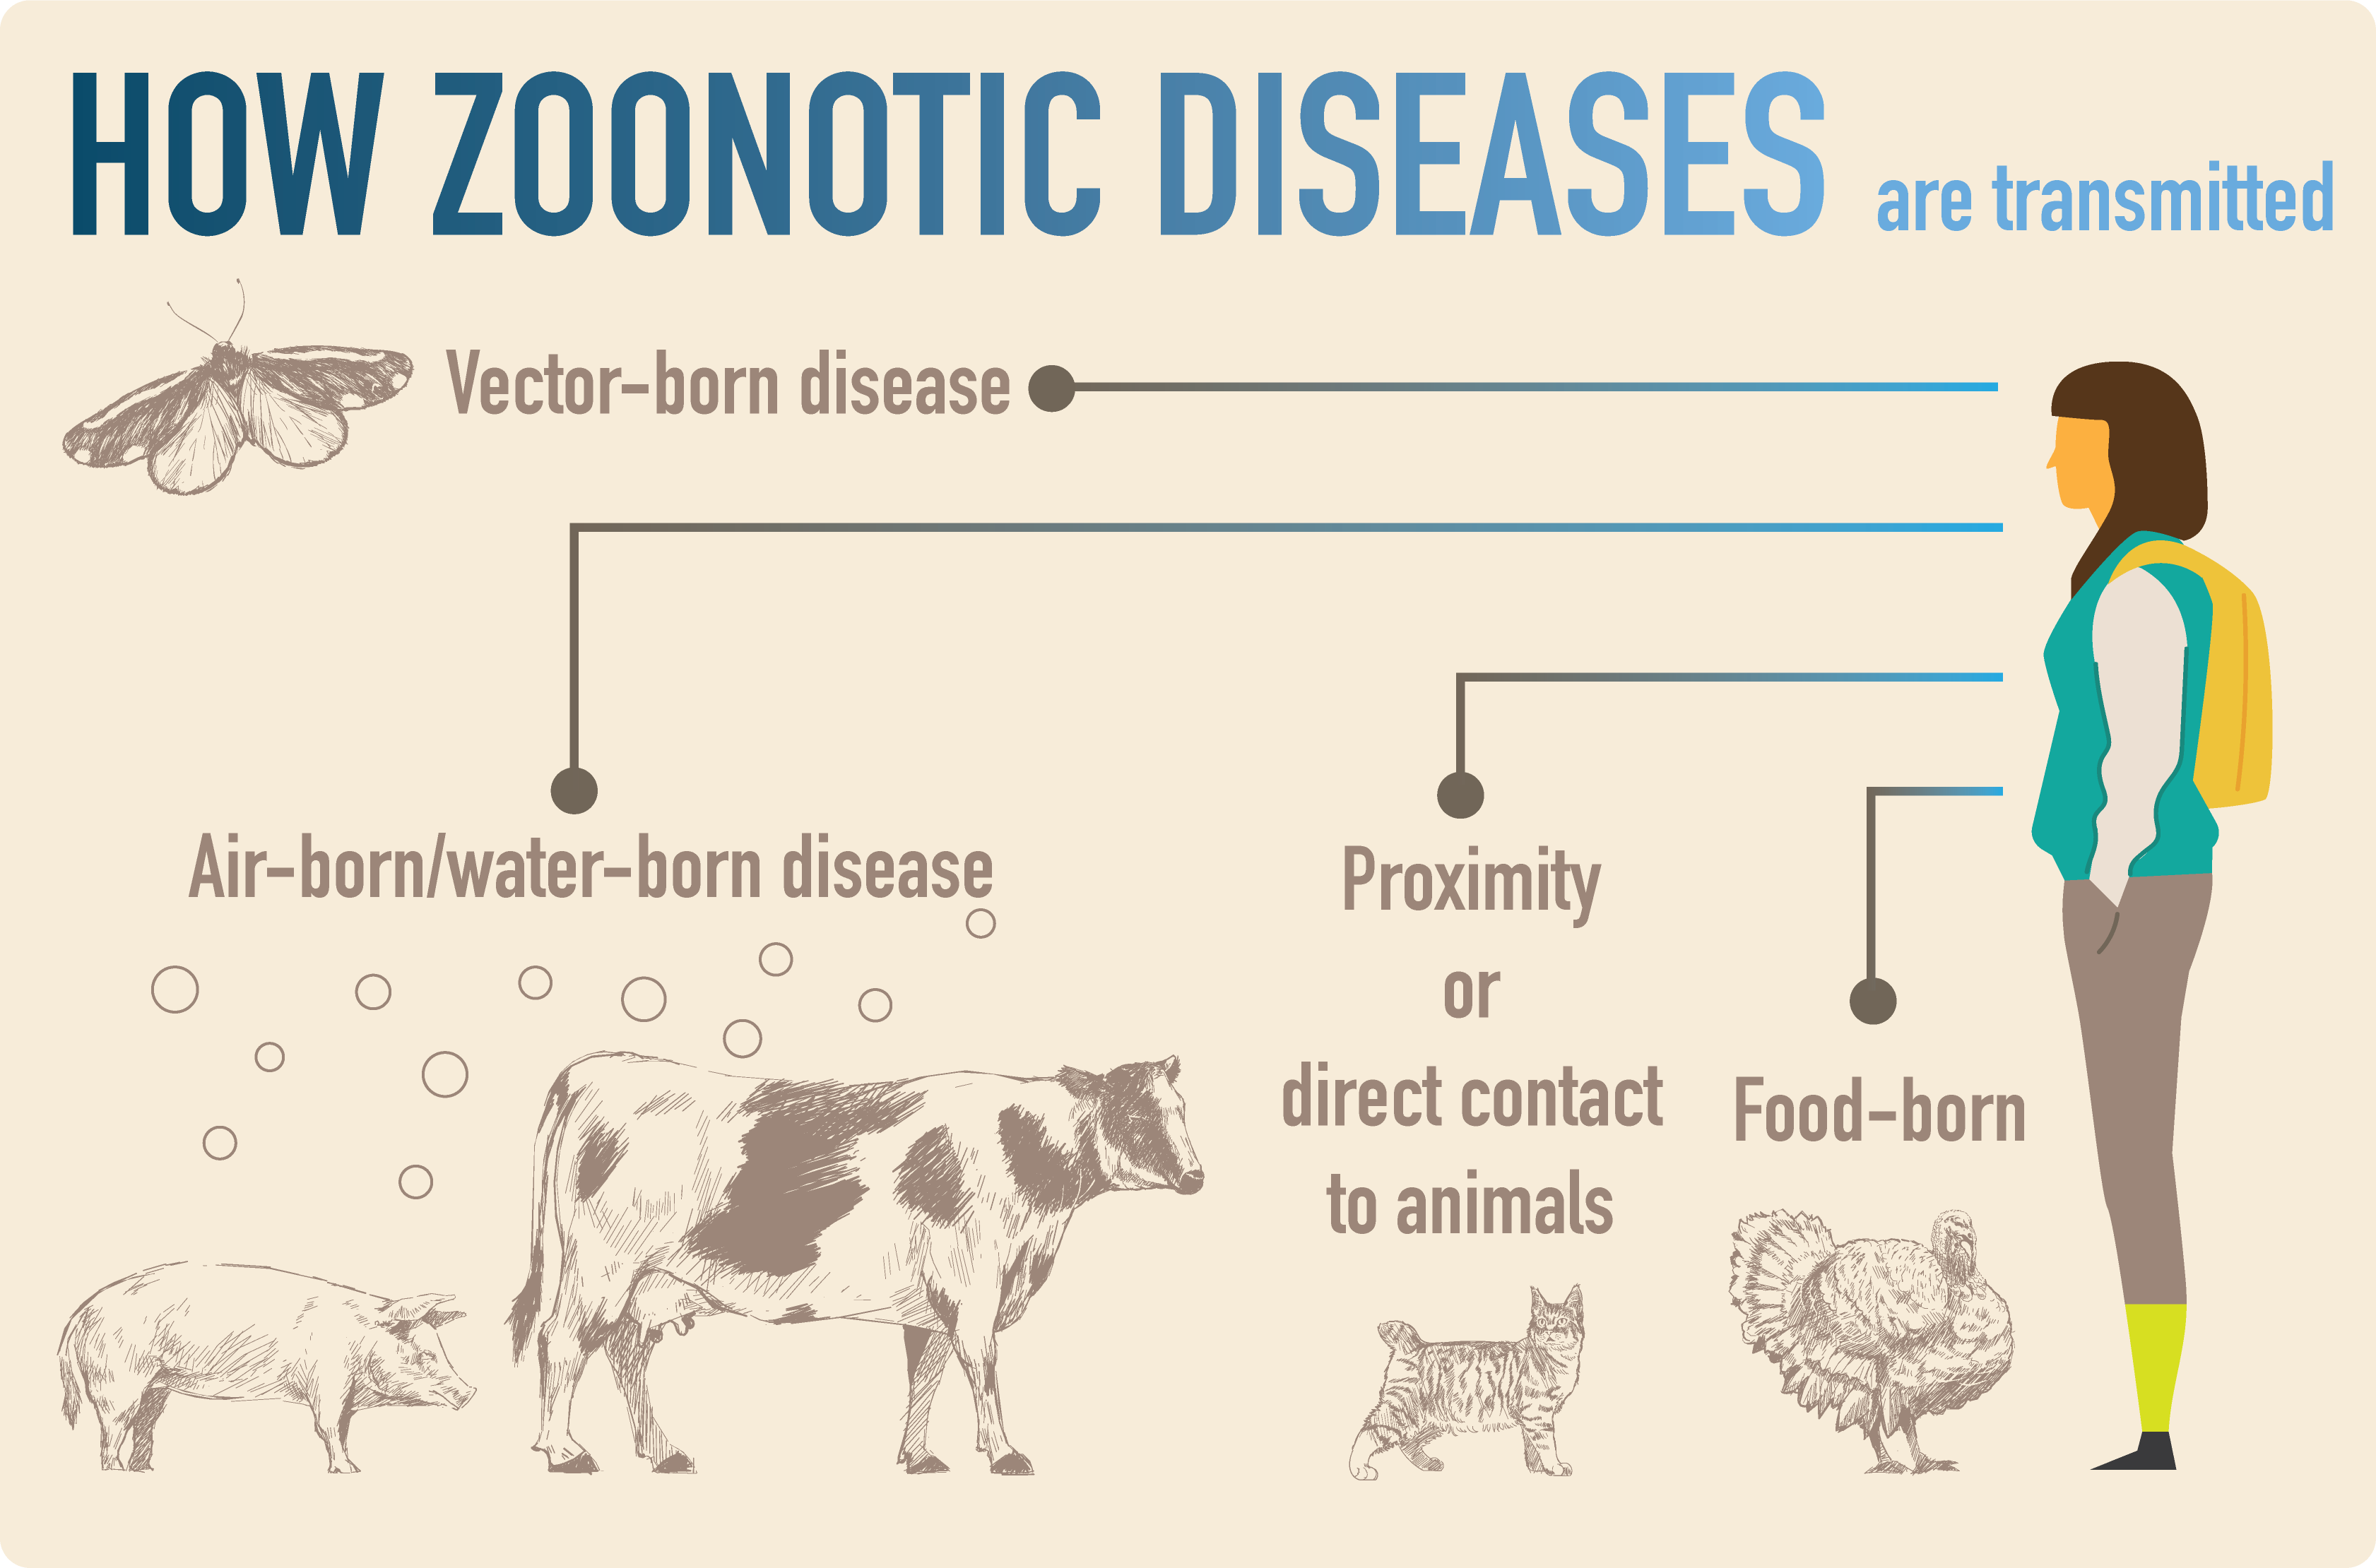 How Zoonotic Diseases are transmitted